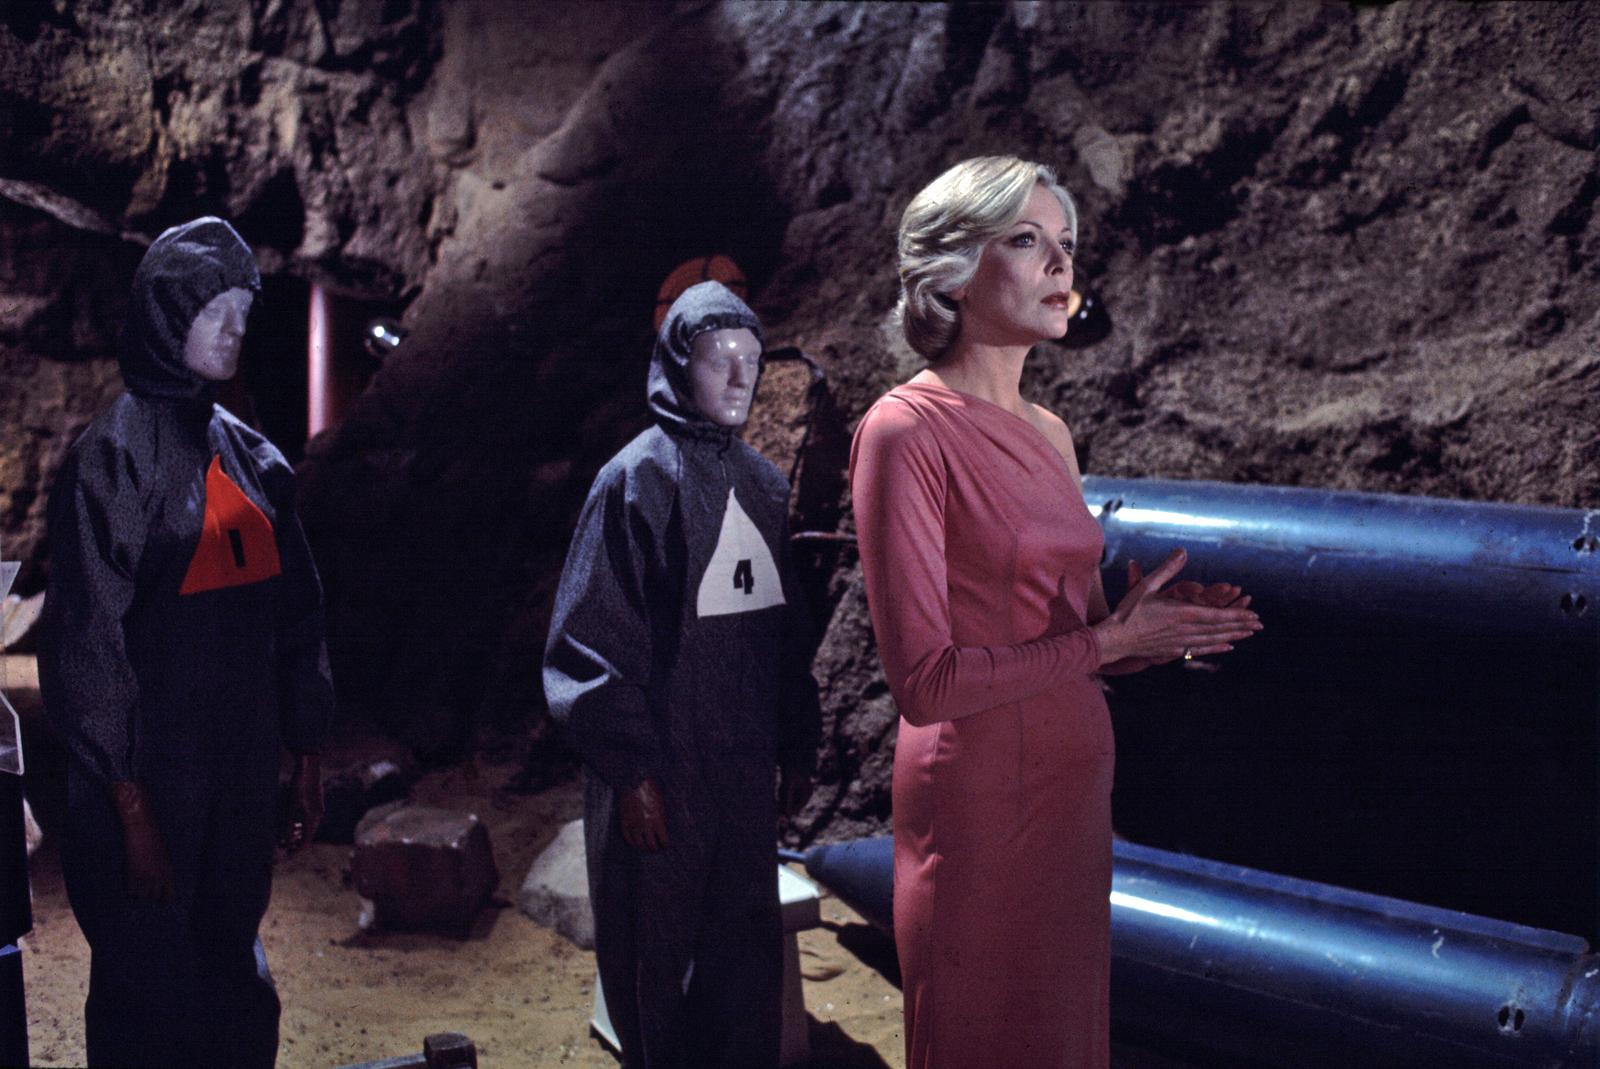 Space 1999 Catacombs One Moment Of Humanity